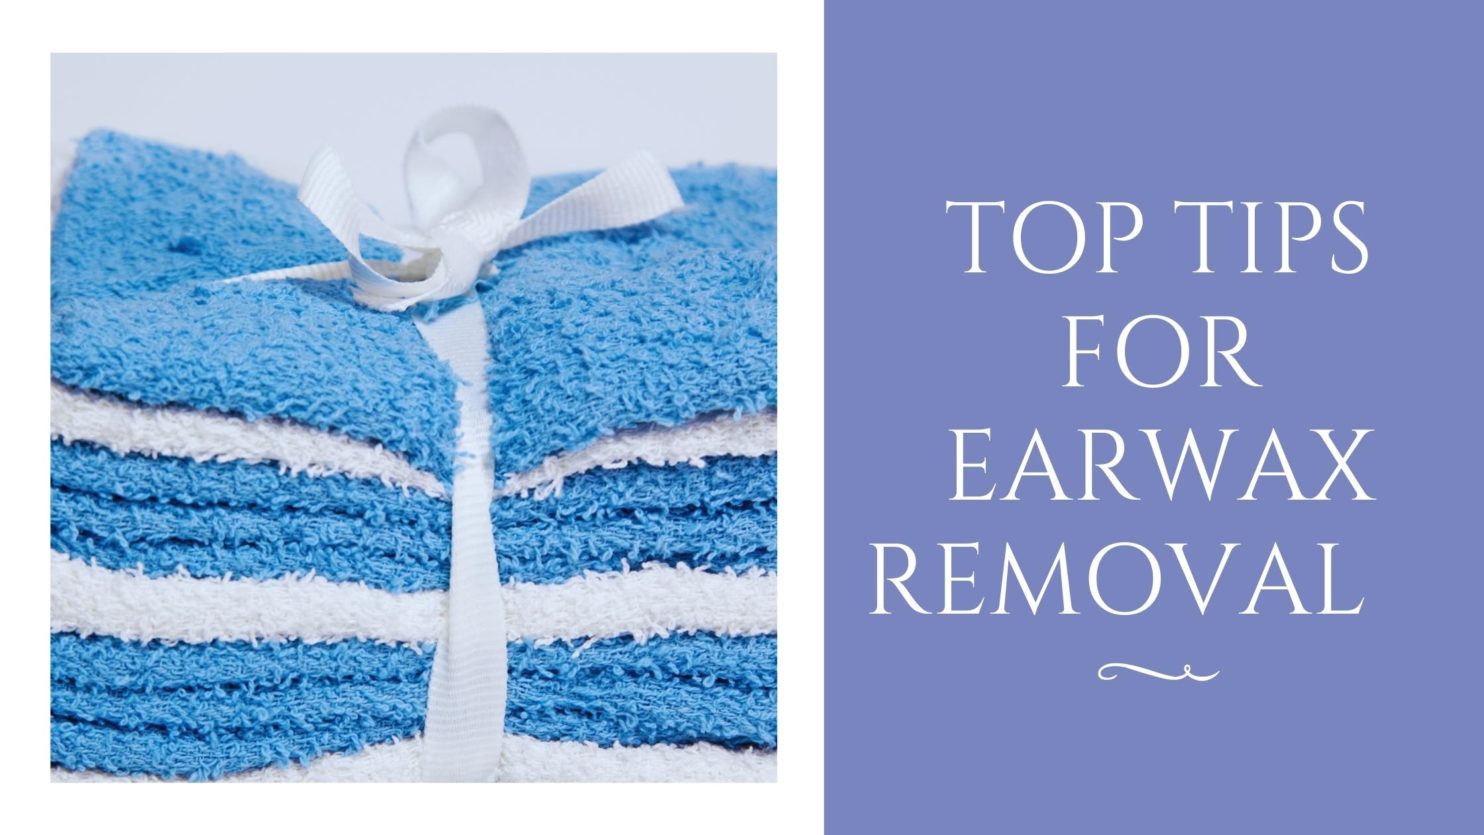 Top Tips for Earwax Removal